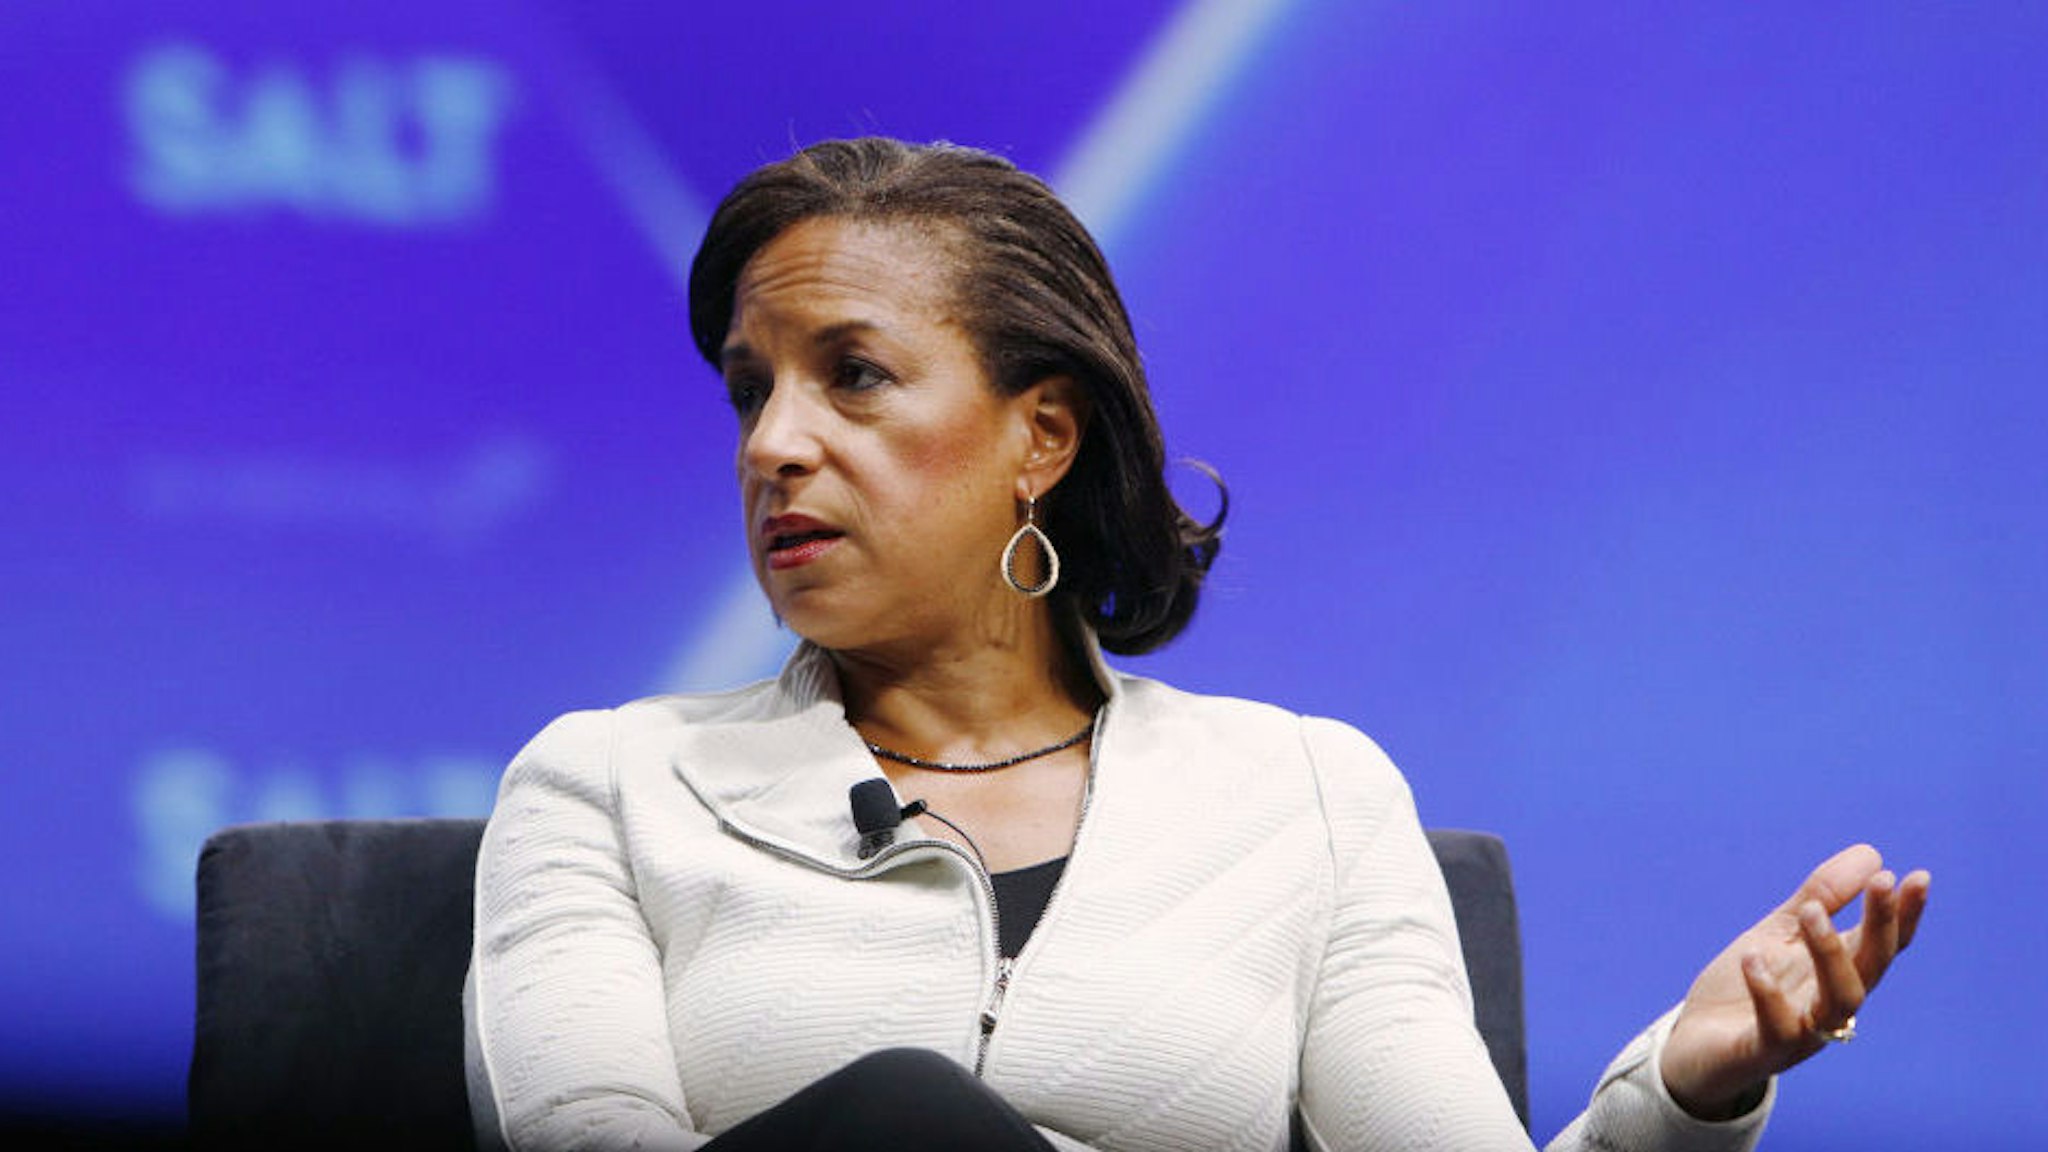 Susan Rice, former U.S. national security advisor, speaks during the Skybridge Alternatives (SALT) conference in Las Vegas, Nevada, U.S., on Wednesday, May 8, 2019. SALT brings together investors, policy experts, politicians and business leaders to network and share ideas to unlock growth opportunities in finance, economics, entrepreneurship, public policy, technology and philanthropy.